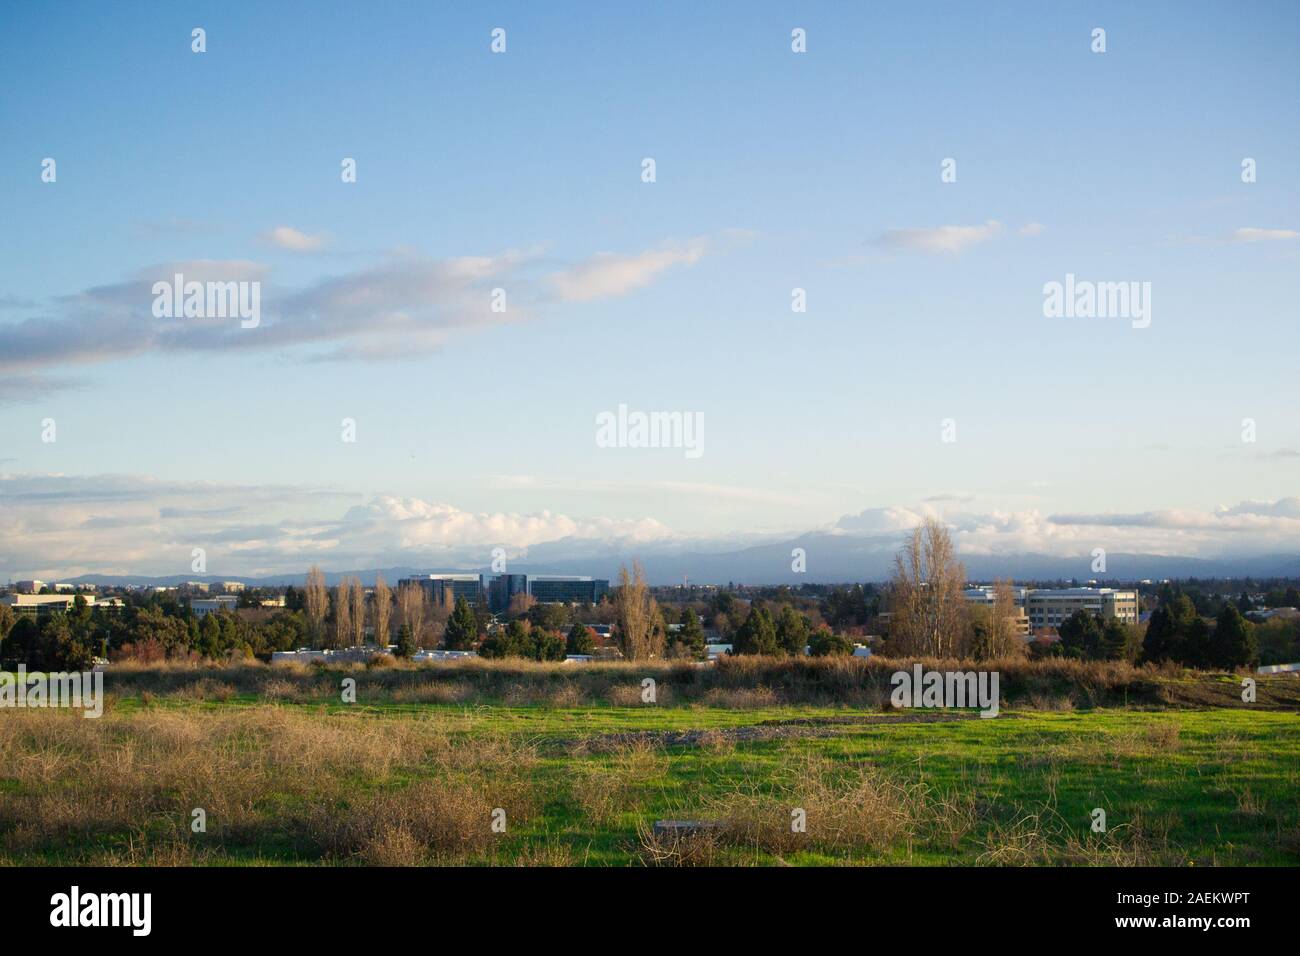 View of Sunnyvale, Silicon Valley from the San Francisco Bay Trail showing office blocks with mountains on the horizon Stock Photo